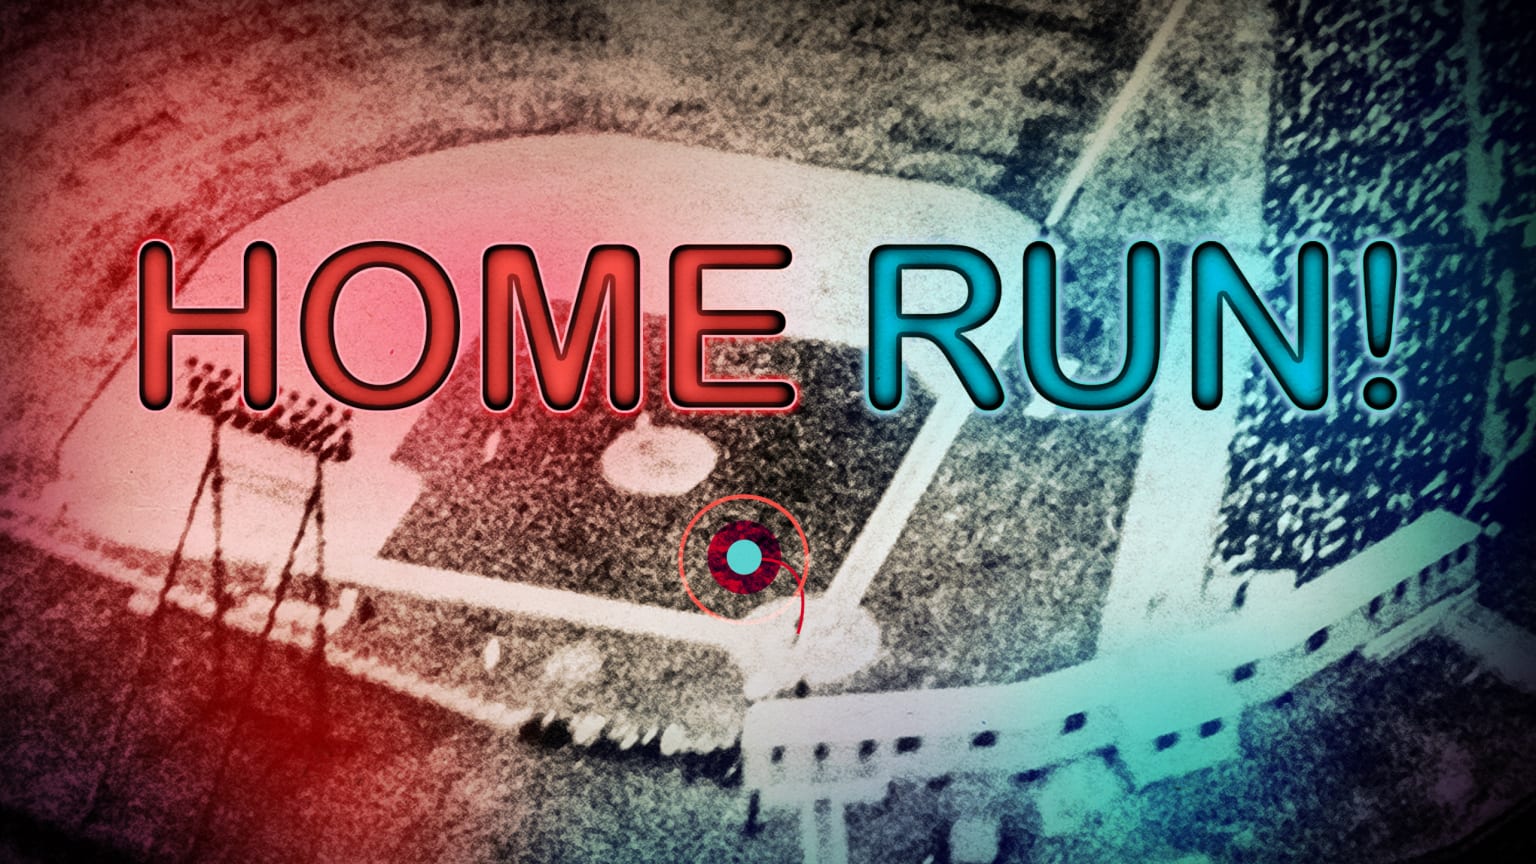 The words home run are shown over a picture of a baseball field